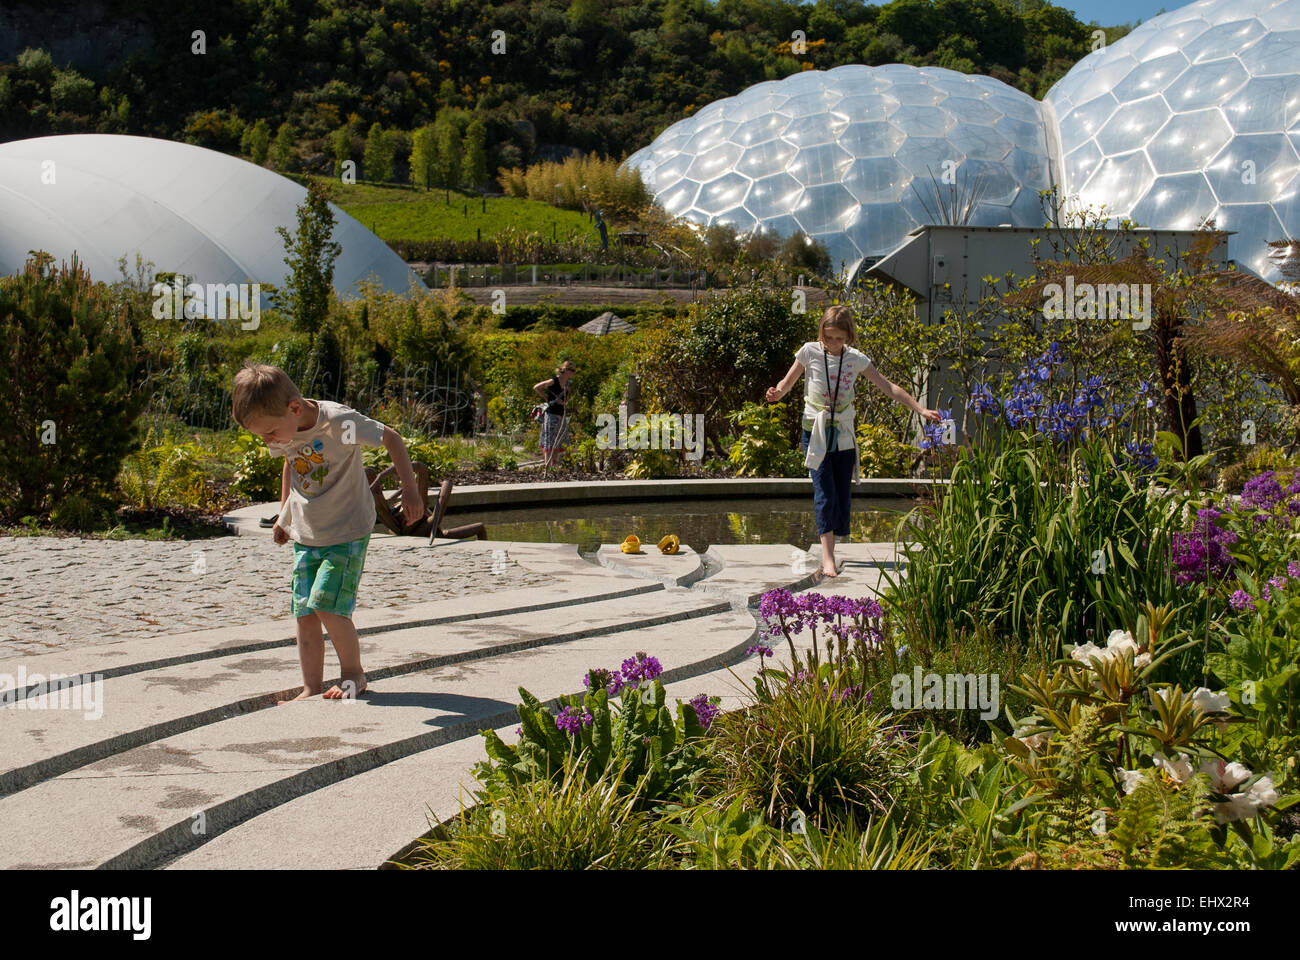 Eden Project Biomes with children in the foreground Stock Photo